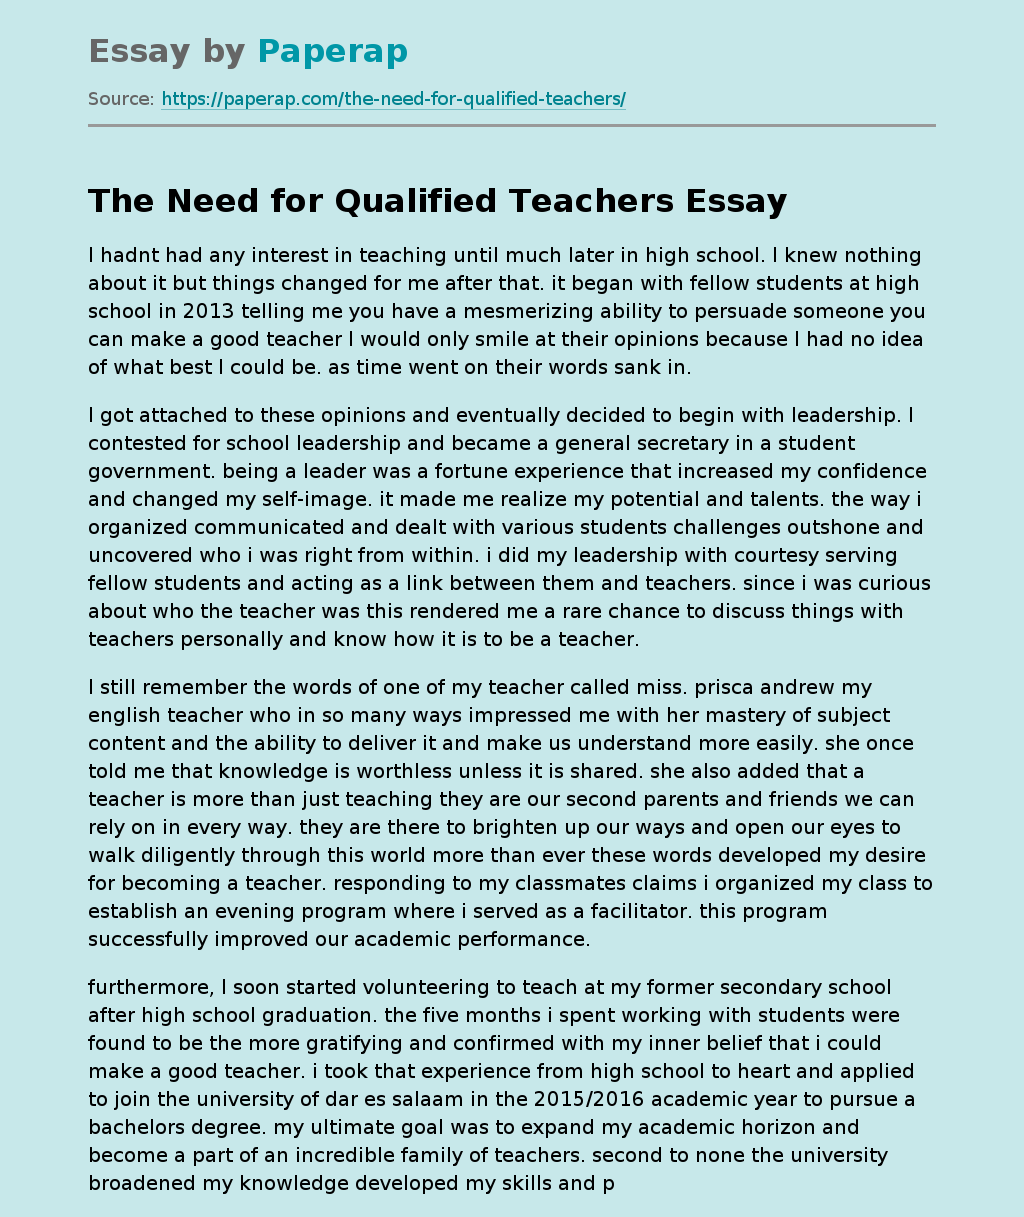 The Need for Qualified Teachers